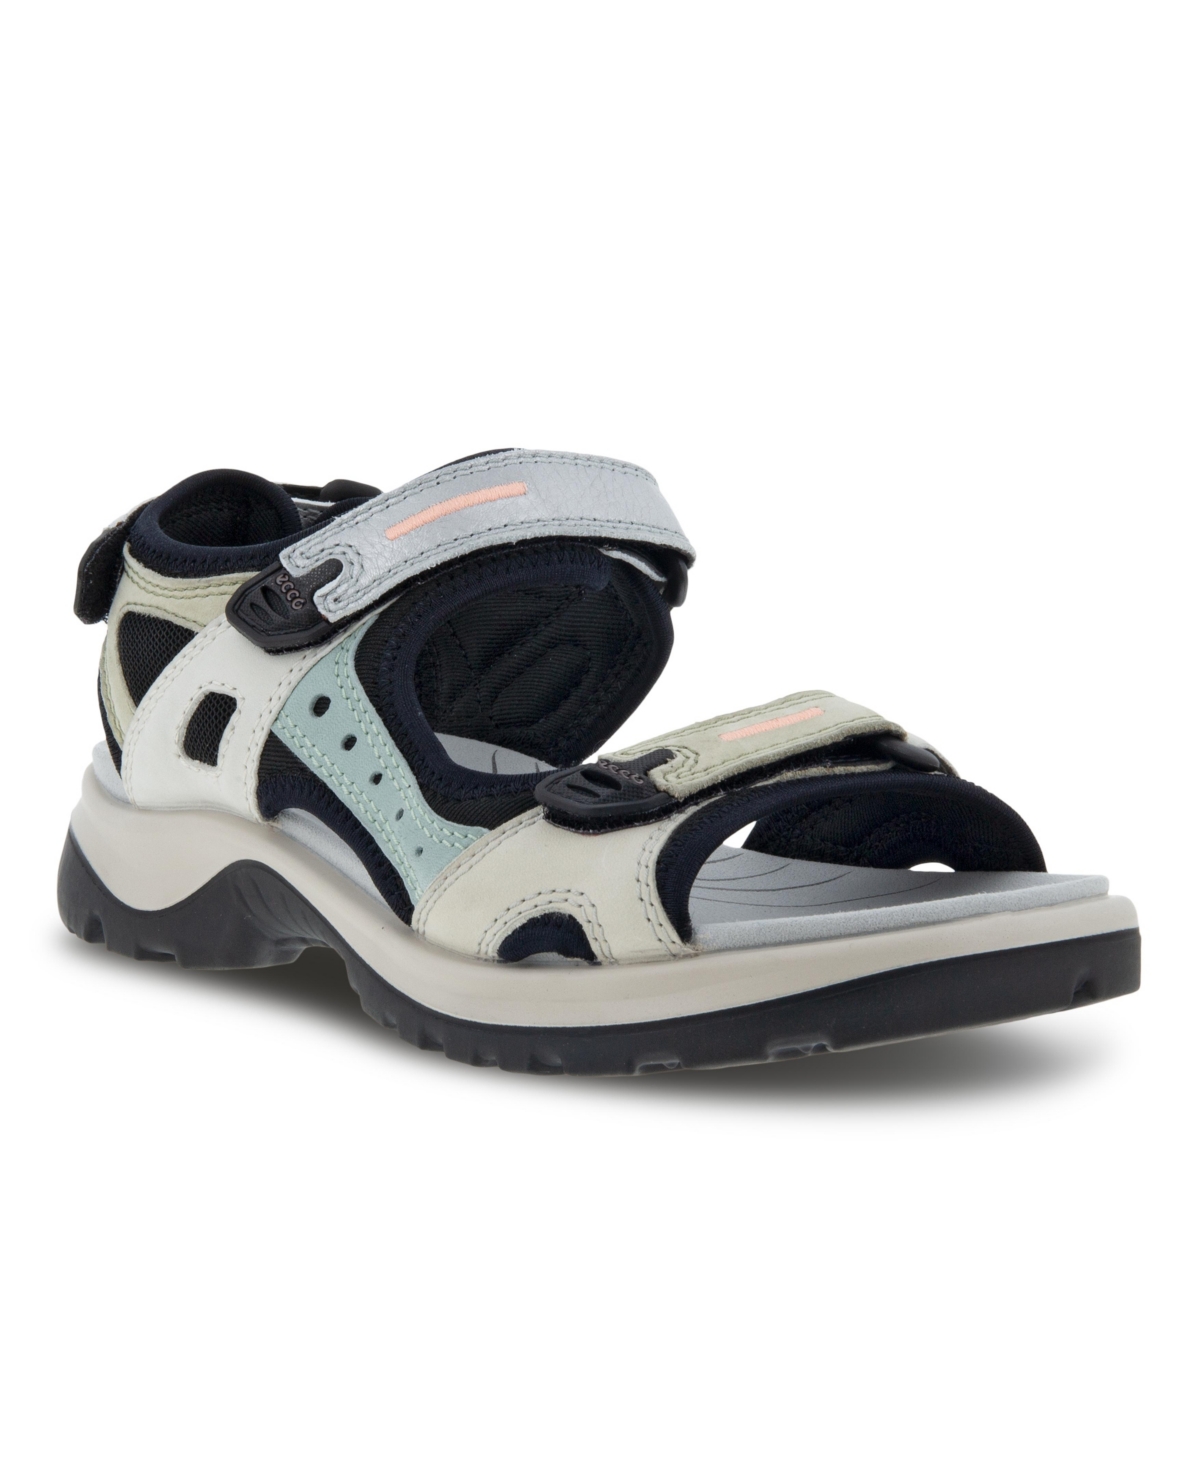 UPC 194891064224 product image for Ecco Women's Offroad Sandals Women's Shoes | upcitemdb.com